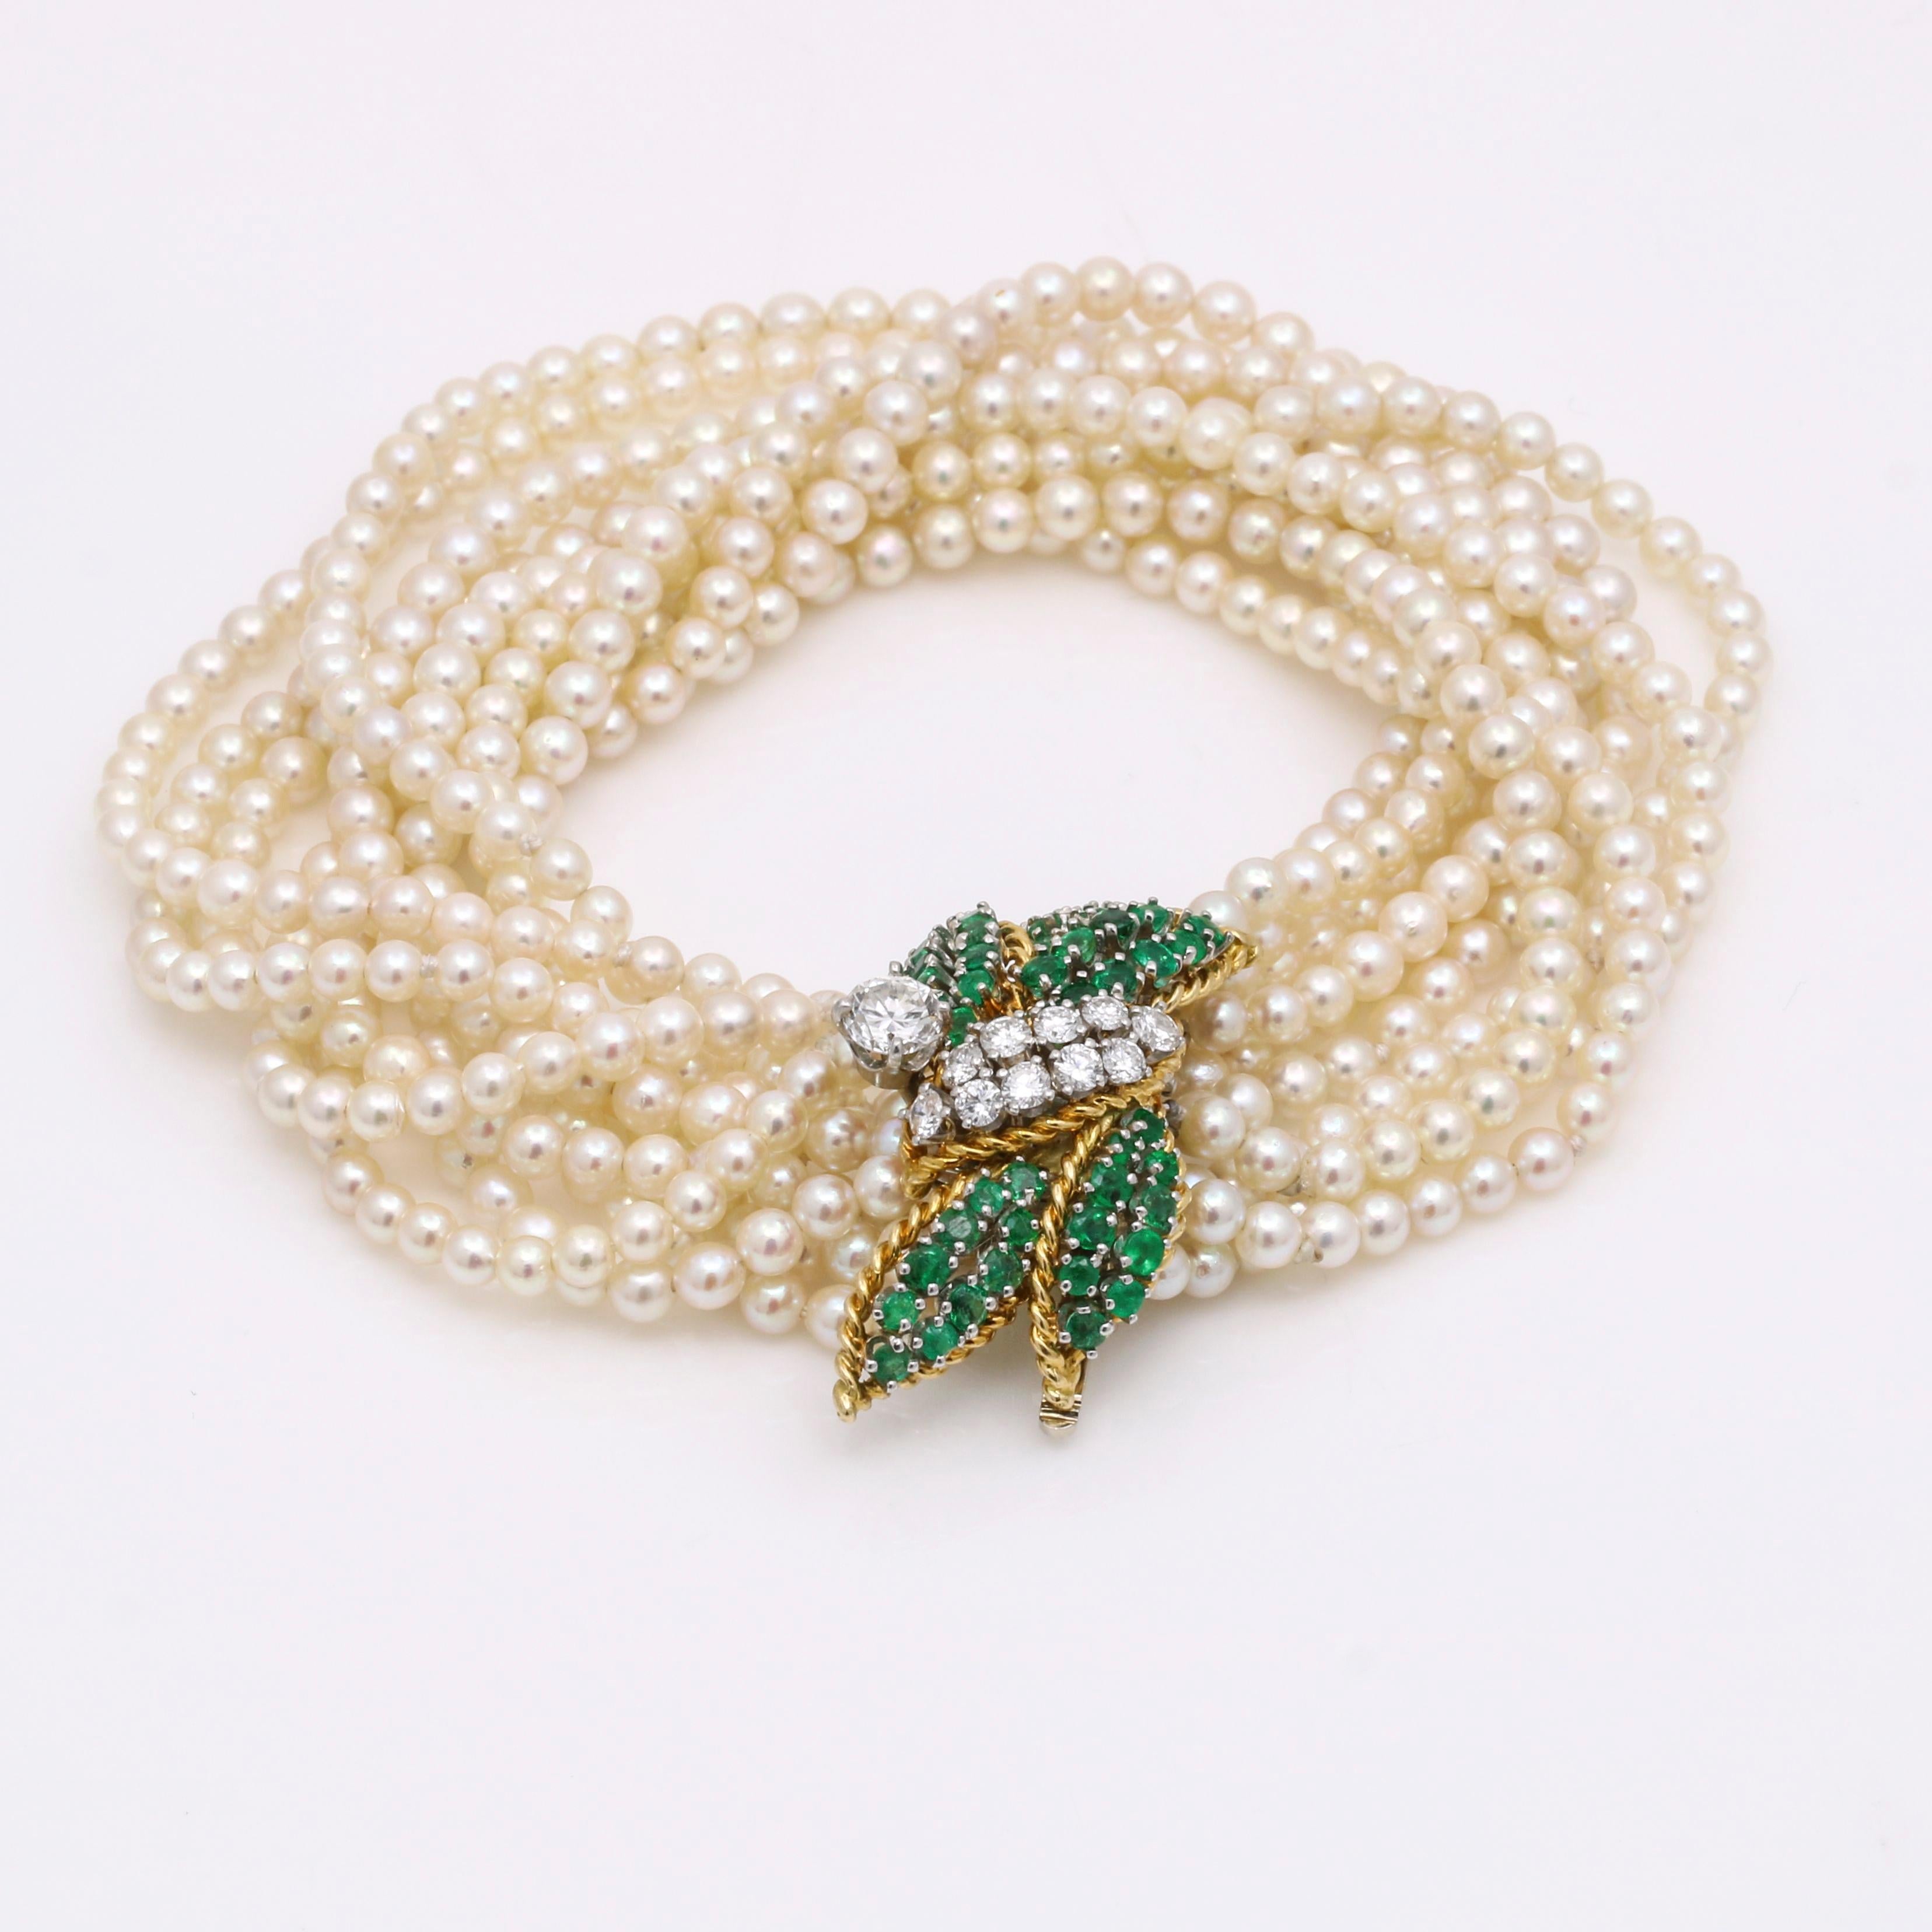 This beautiful diamond and emerald multi-strand pearl bracelet is a timeless piece of fine jewelry. The elegant leaves clasp crafted of 18k yellow gold and encrusted with emeralds and diamonds adds stunning detail to the overall design. The round